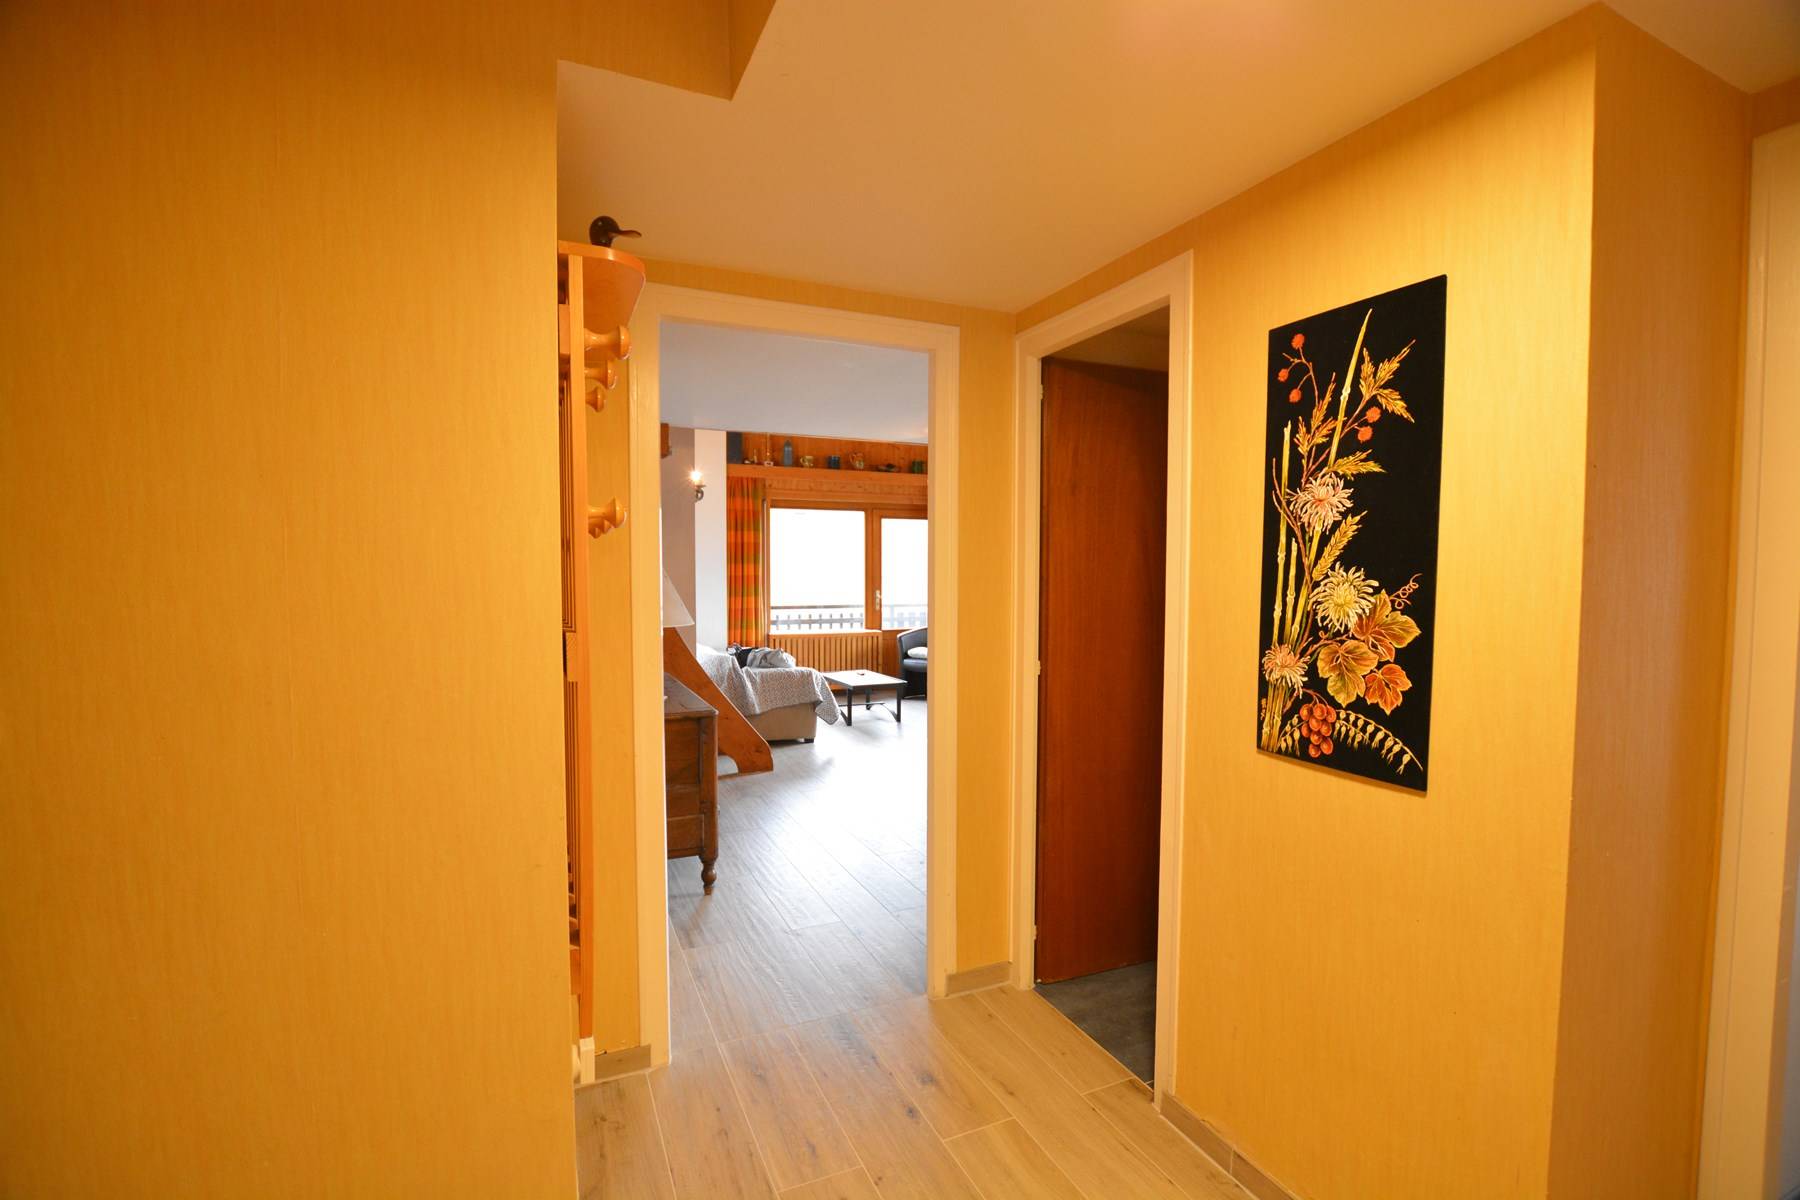 Appartement Planay CH320-1A - Le Grand Bornand